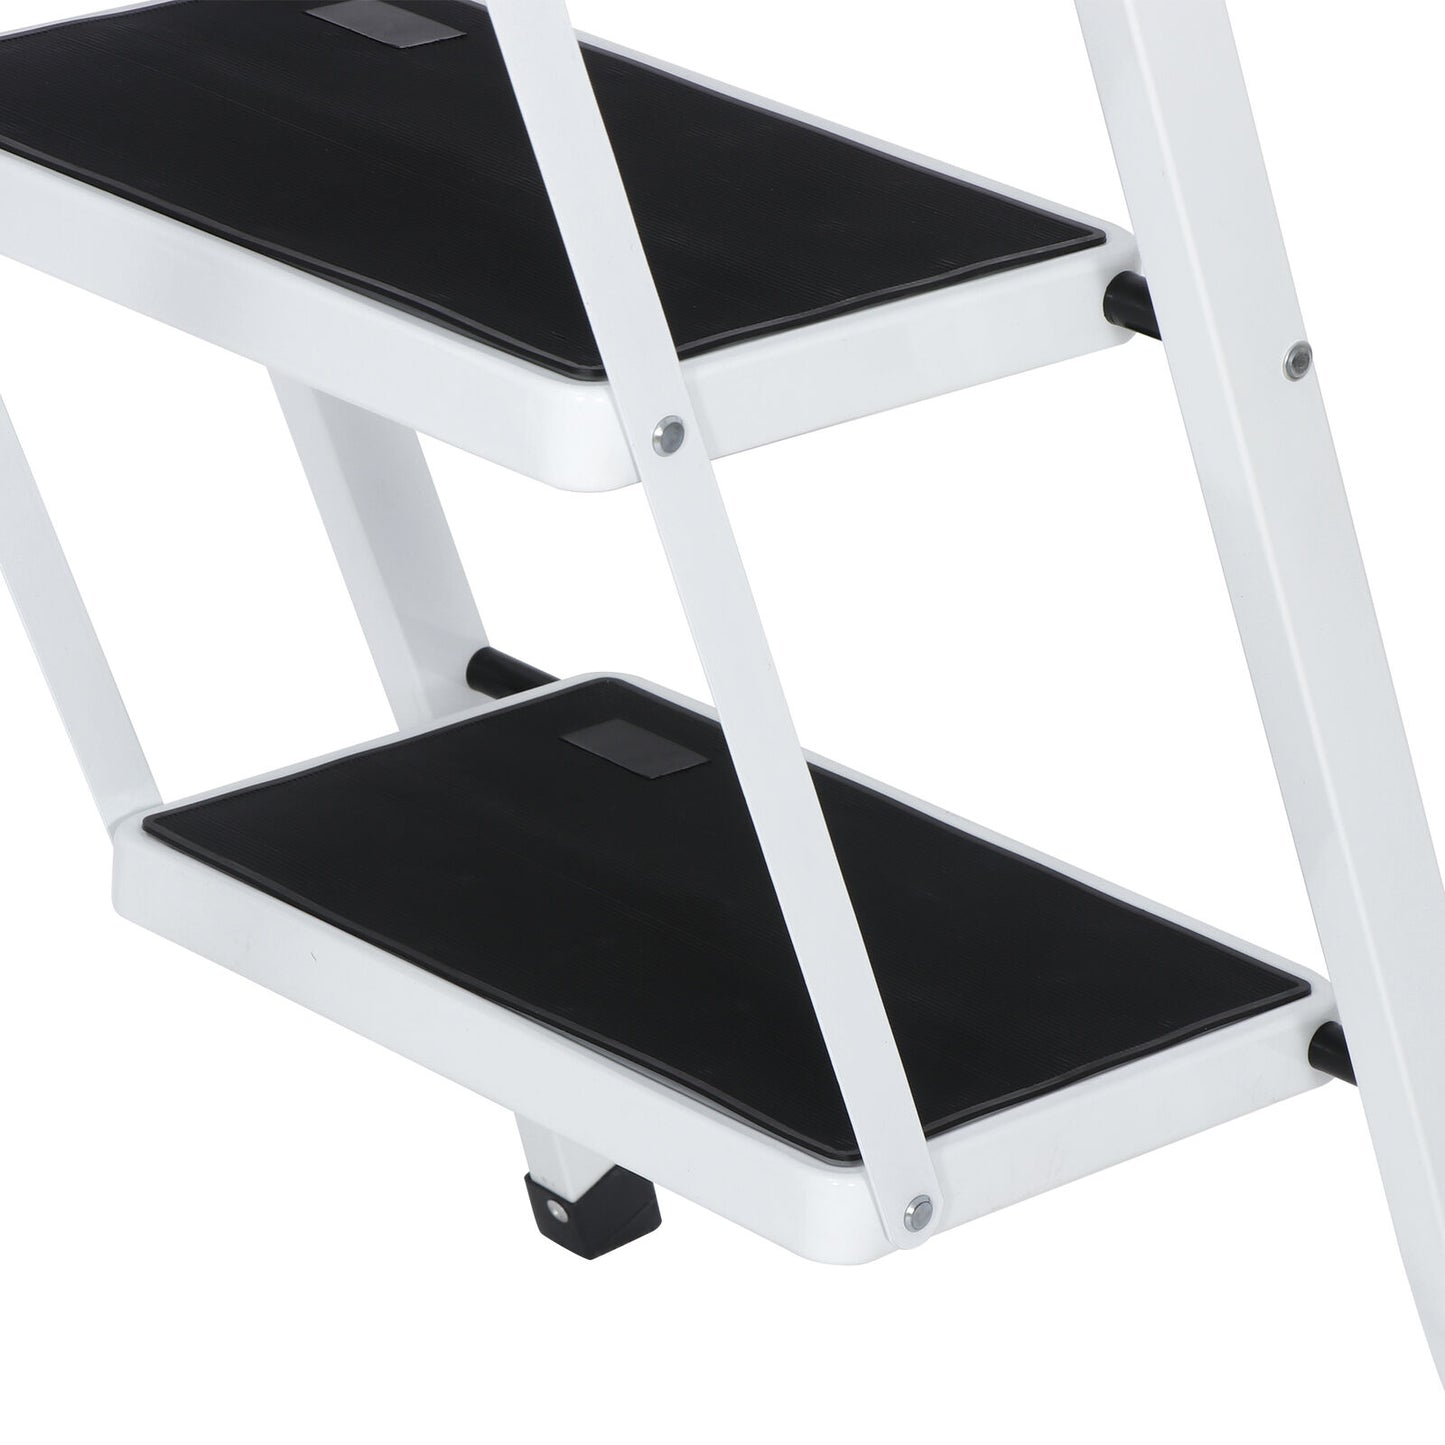 4 Step Ladder with Convenient Handgrip Anti-Slip Sturdy and Wide Pedal 330lbs